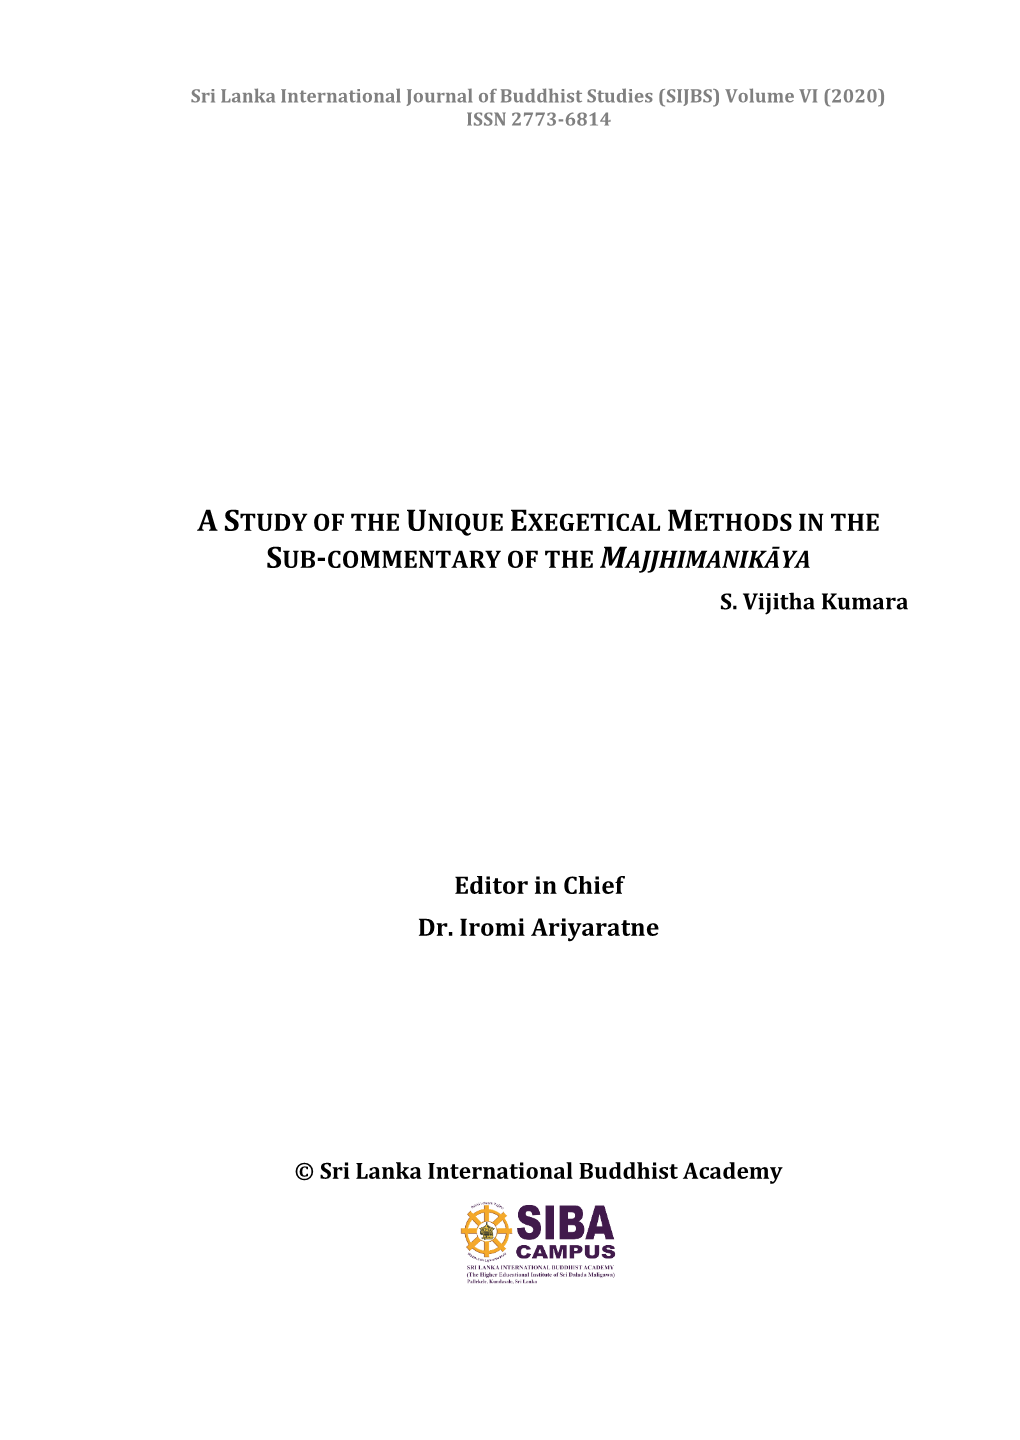 A Study of the Unique Exegetical Methods in the Sub-Commentary of the Majjhimanikāya S